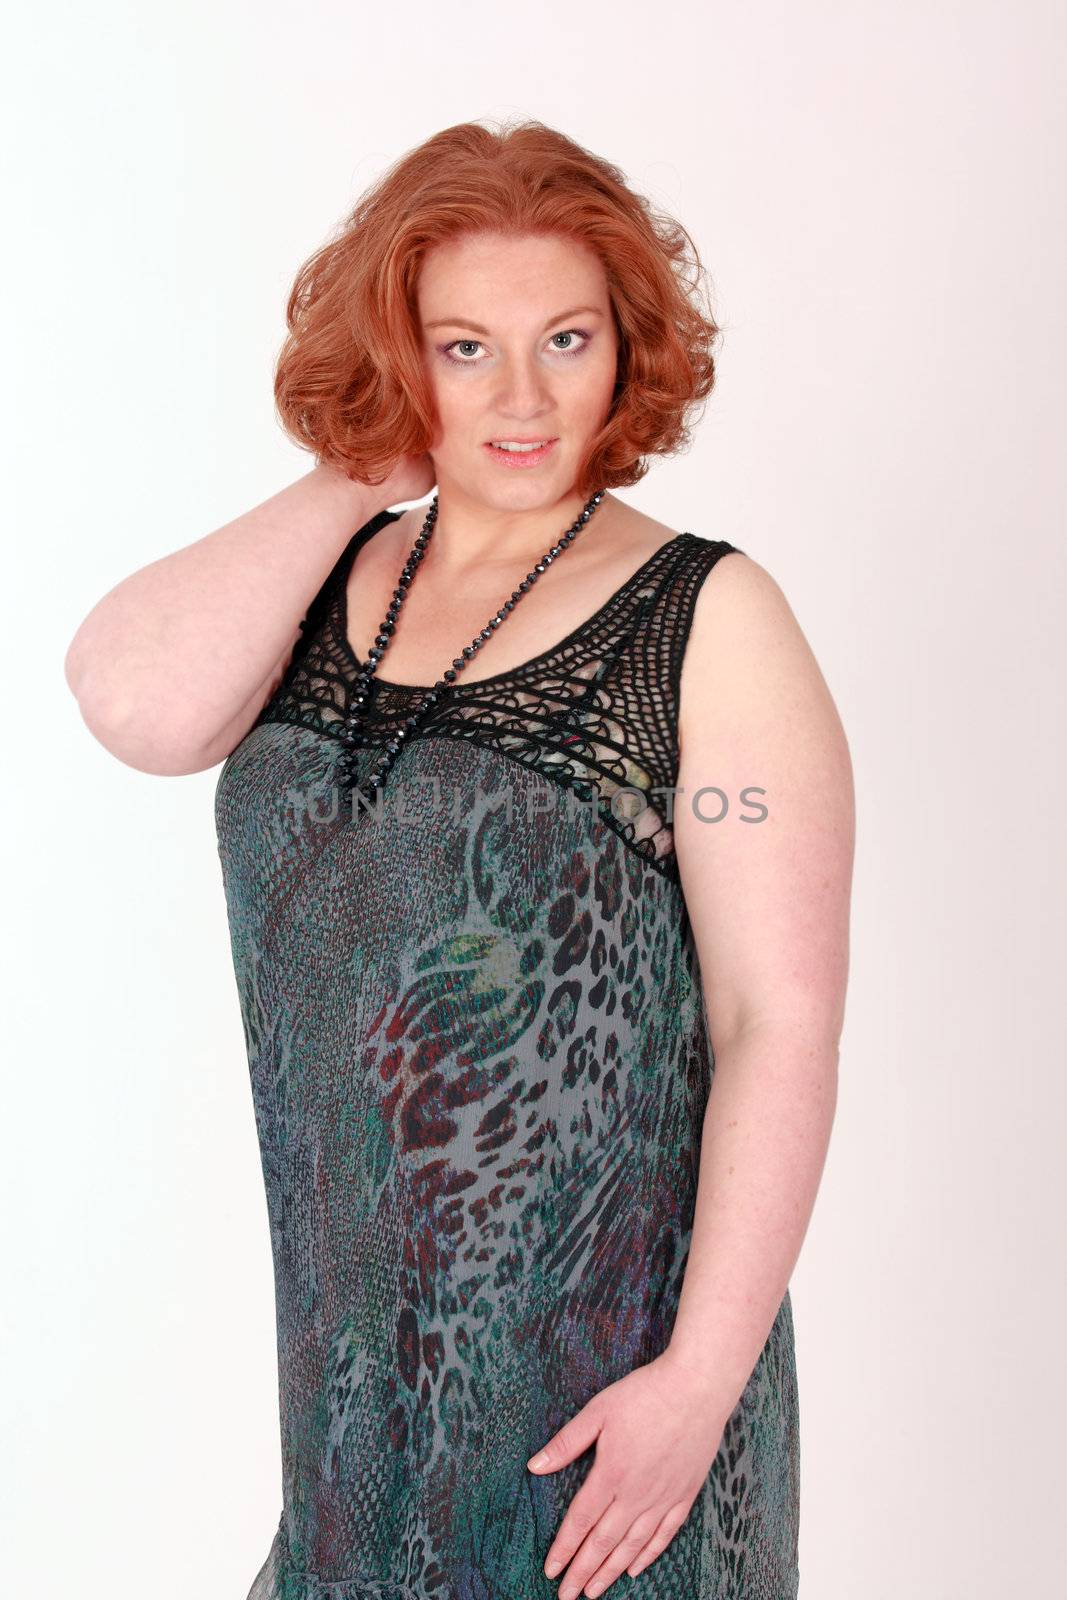 Plus Size Model with red hair in fashionable clothing